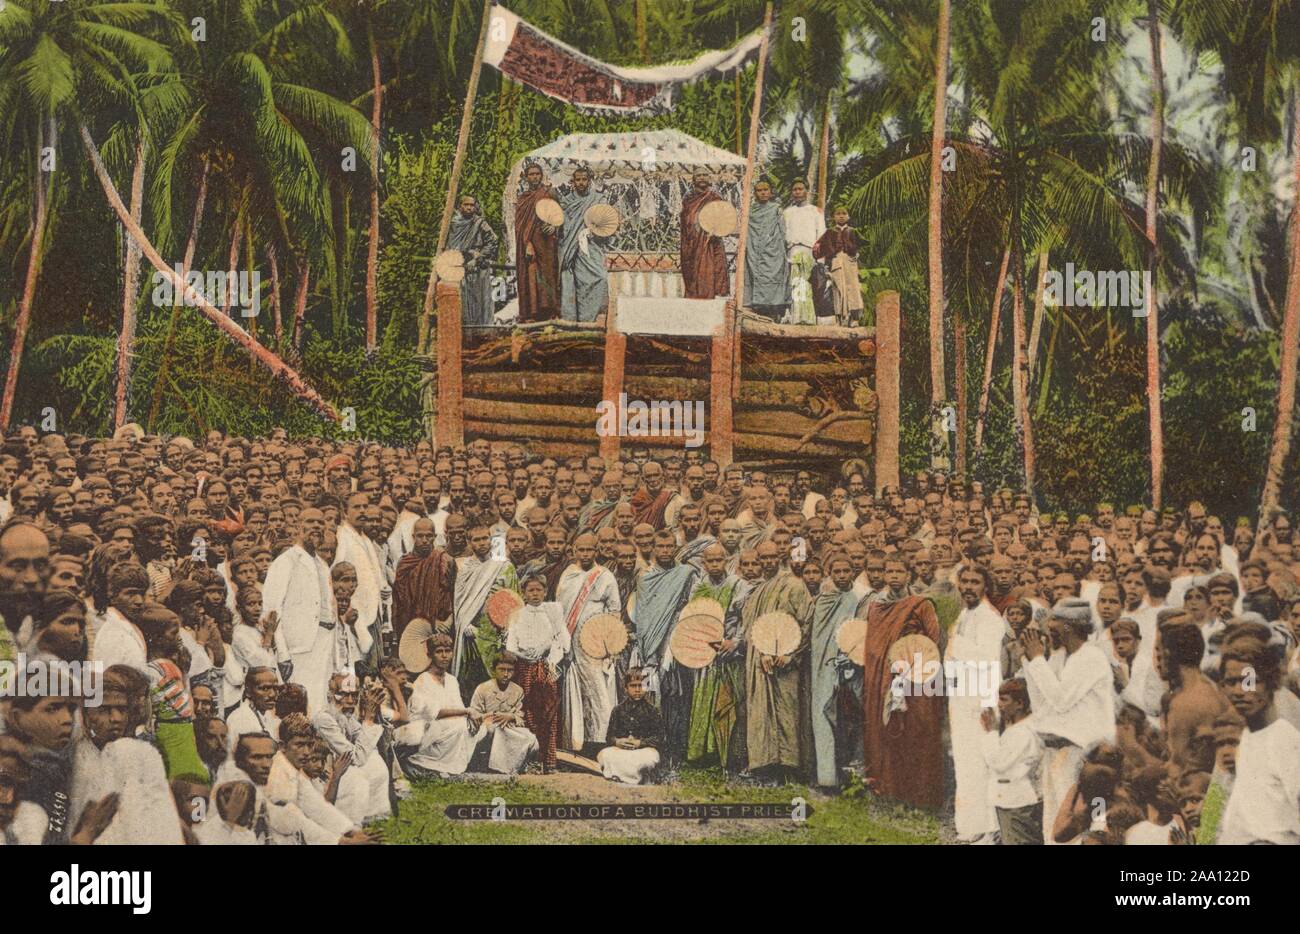 Illustrated postcard of a large crowd of Buddhist monks attending a cremation ceremony, Sri Lanka, published by A.W.A. Plate and Co, 1915. From the New York Public Library. () Stock Photo